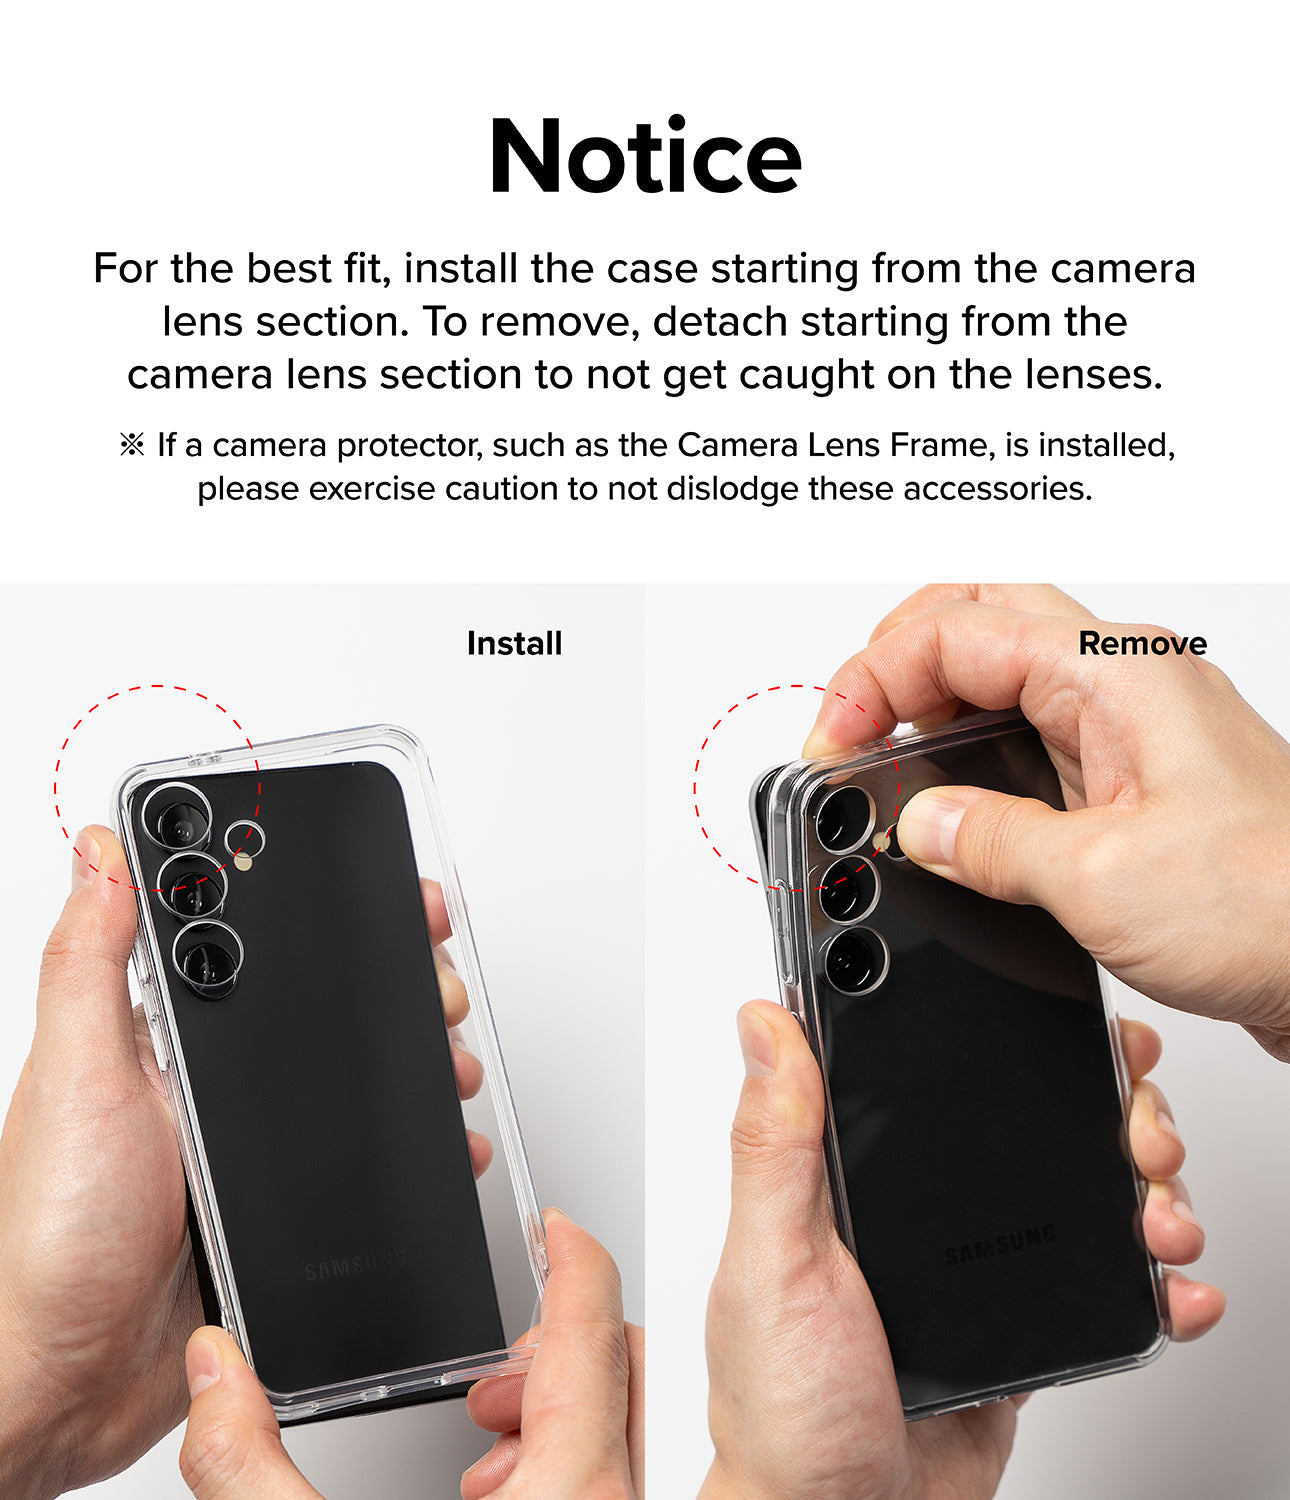 Galaxy S24 Case | Onyx - Navy - Notice. For the best fit, install the case starting from the camera lens section. To remove, detach starting from the camera lens section to not get caught on the lenses.